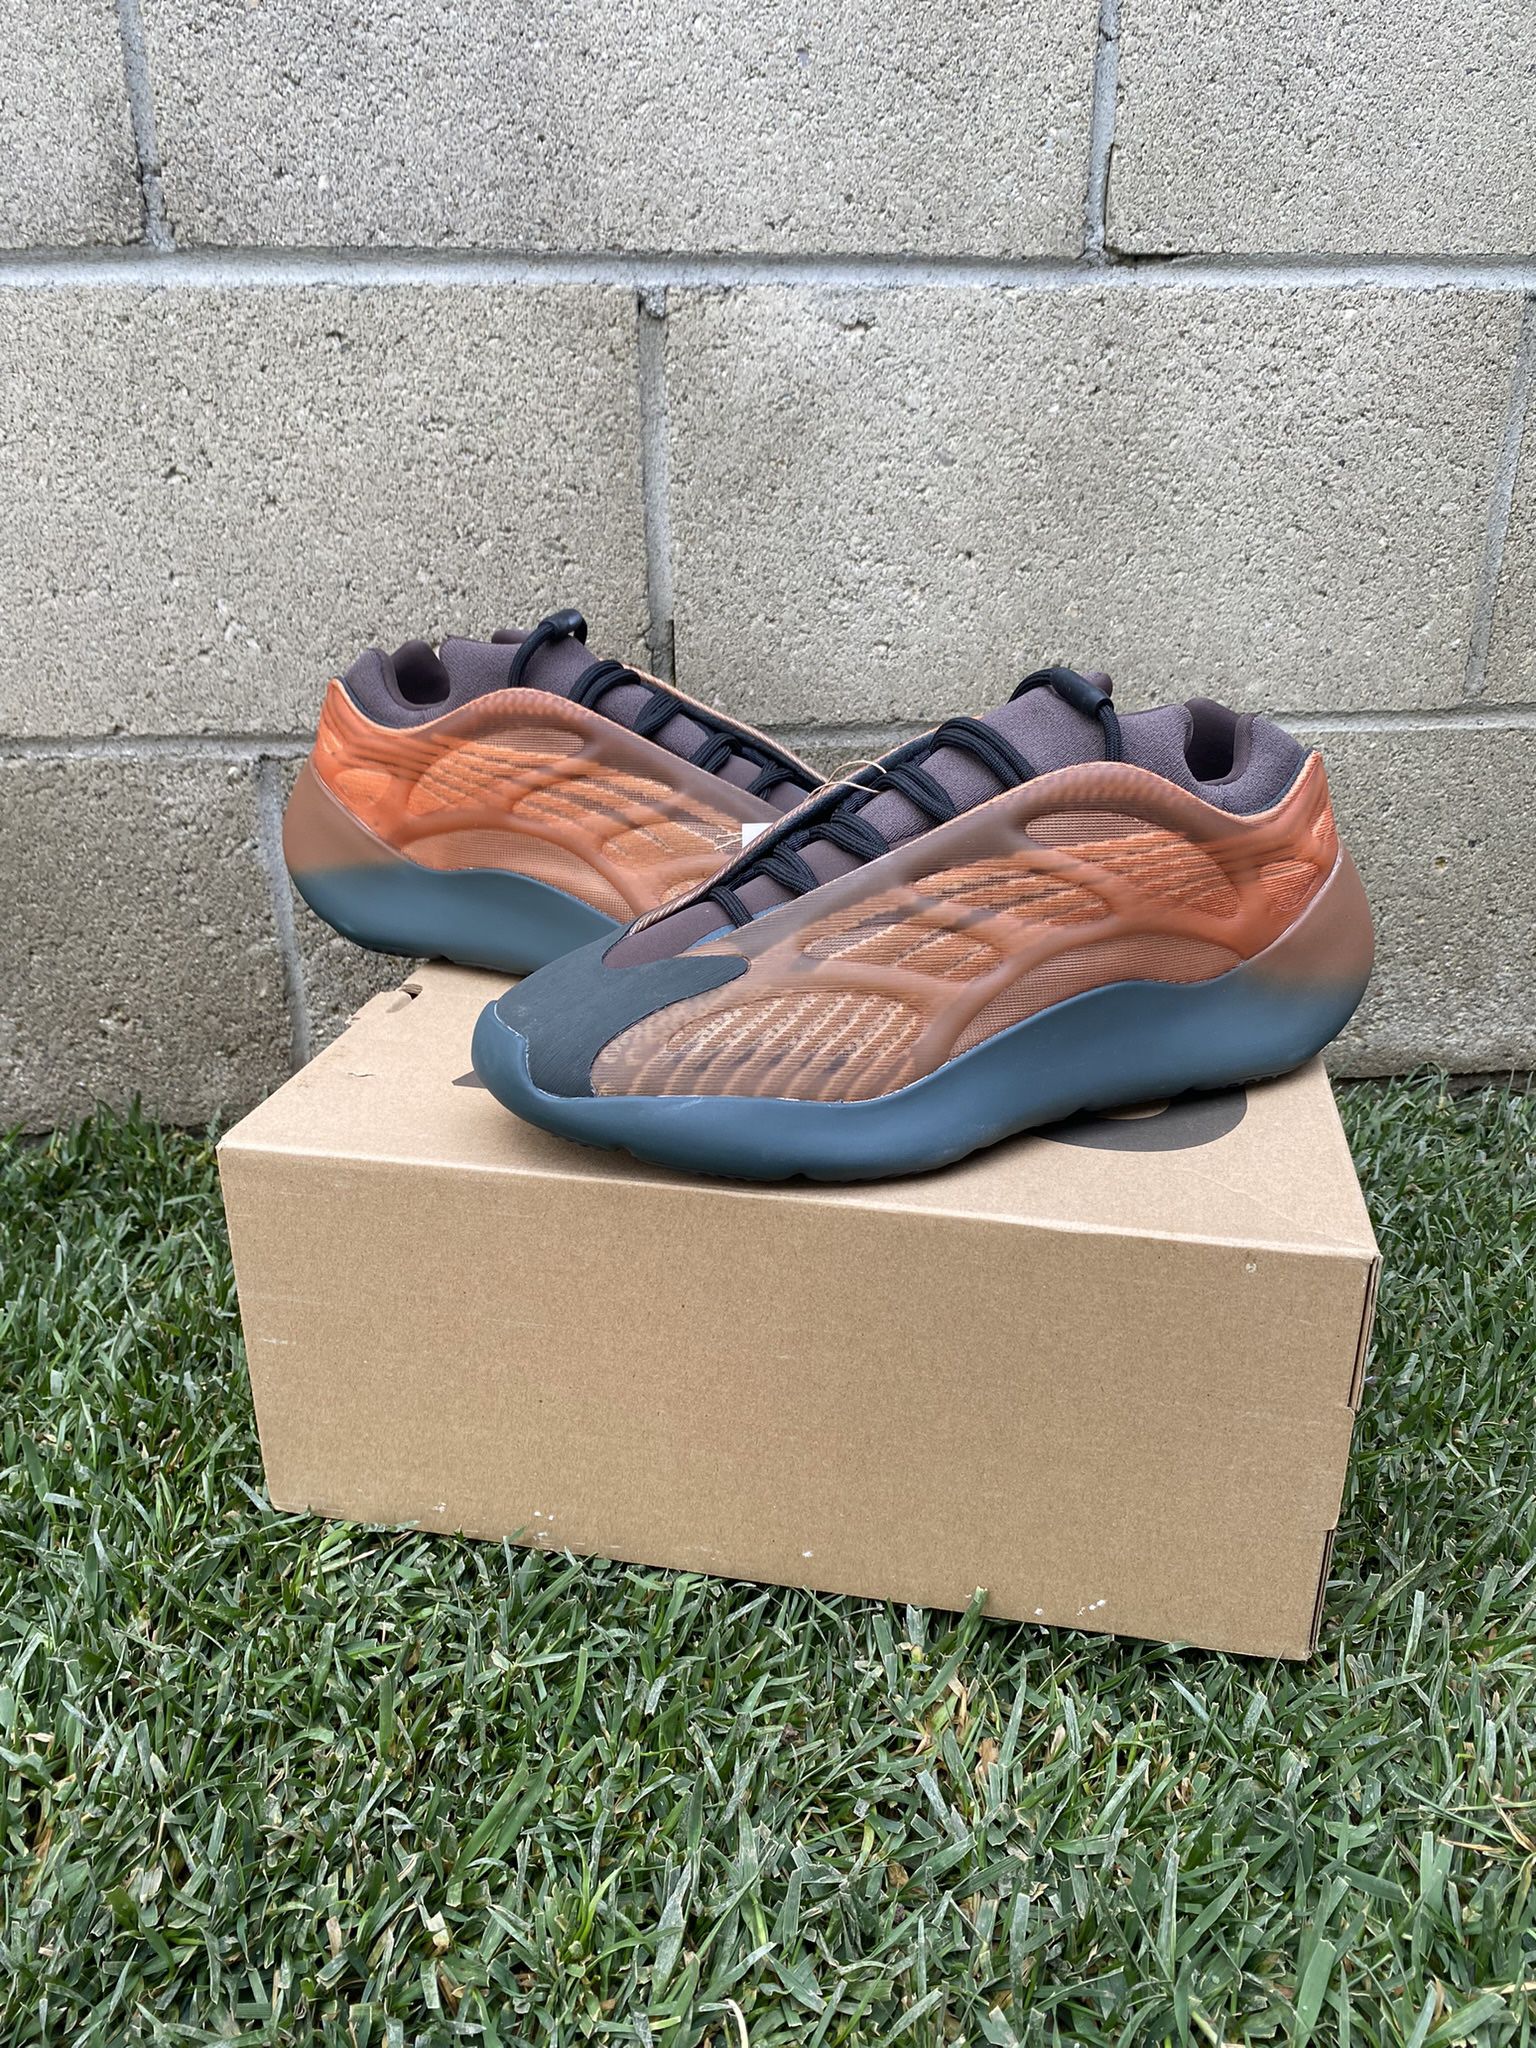 Adidas Yeezy 700 Copper Fade Size 11 M 